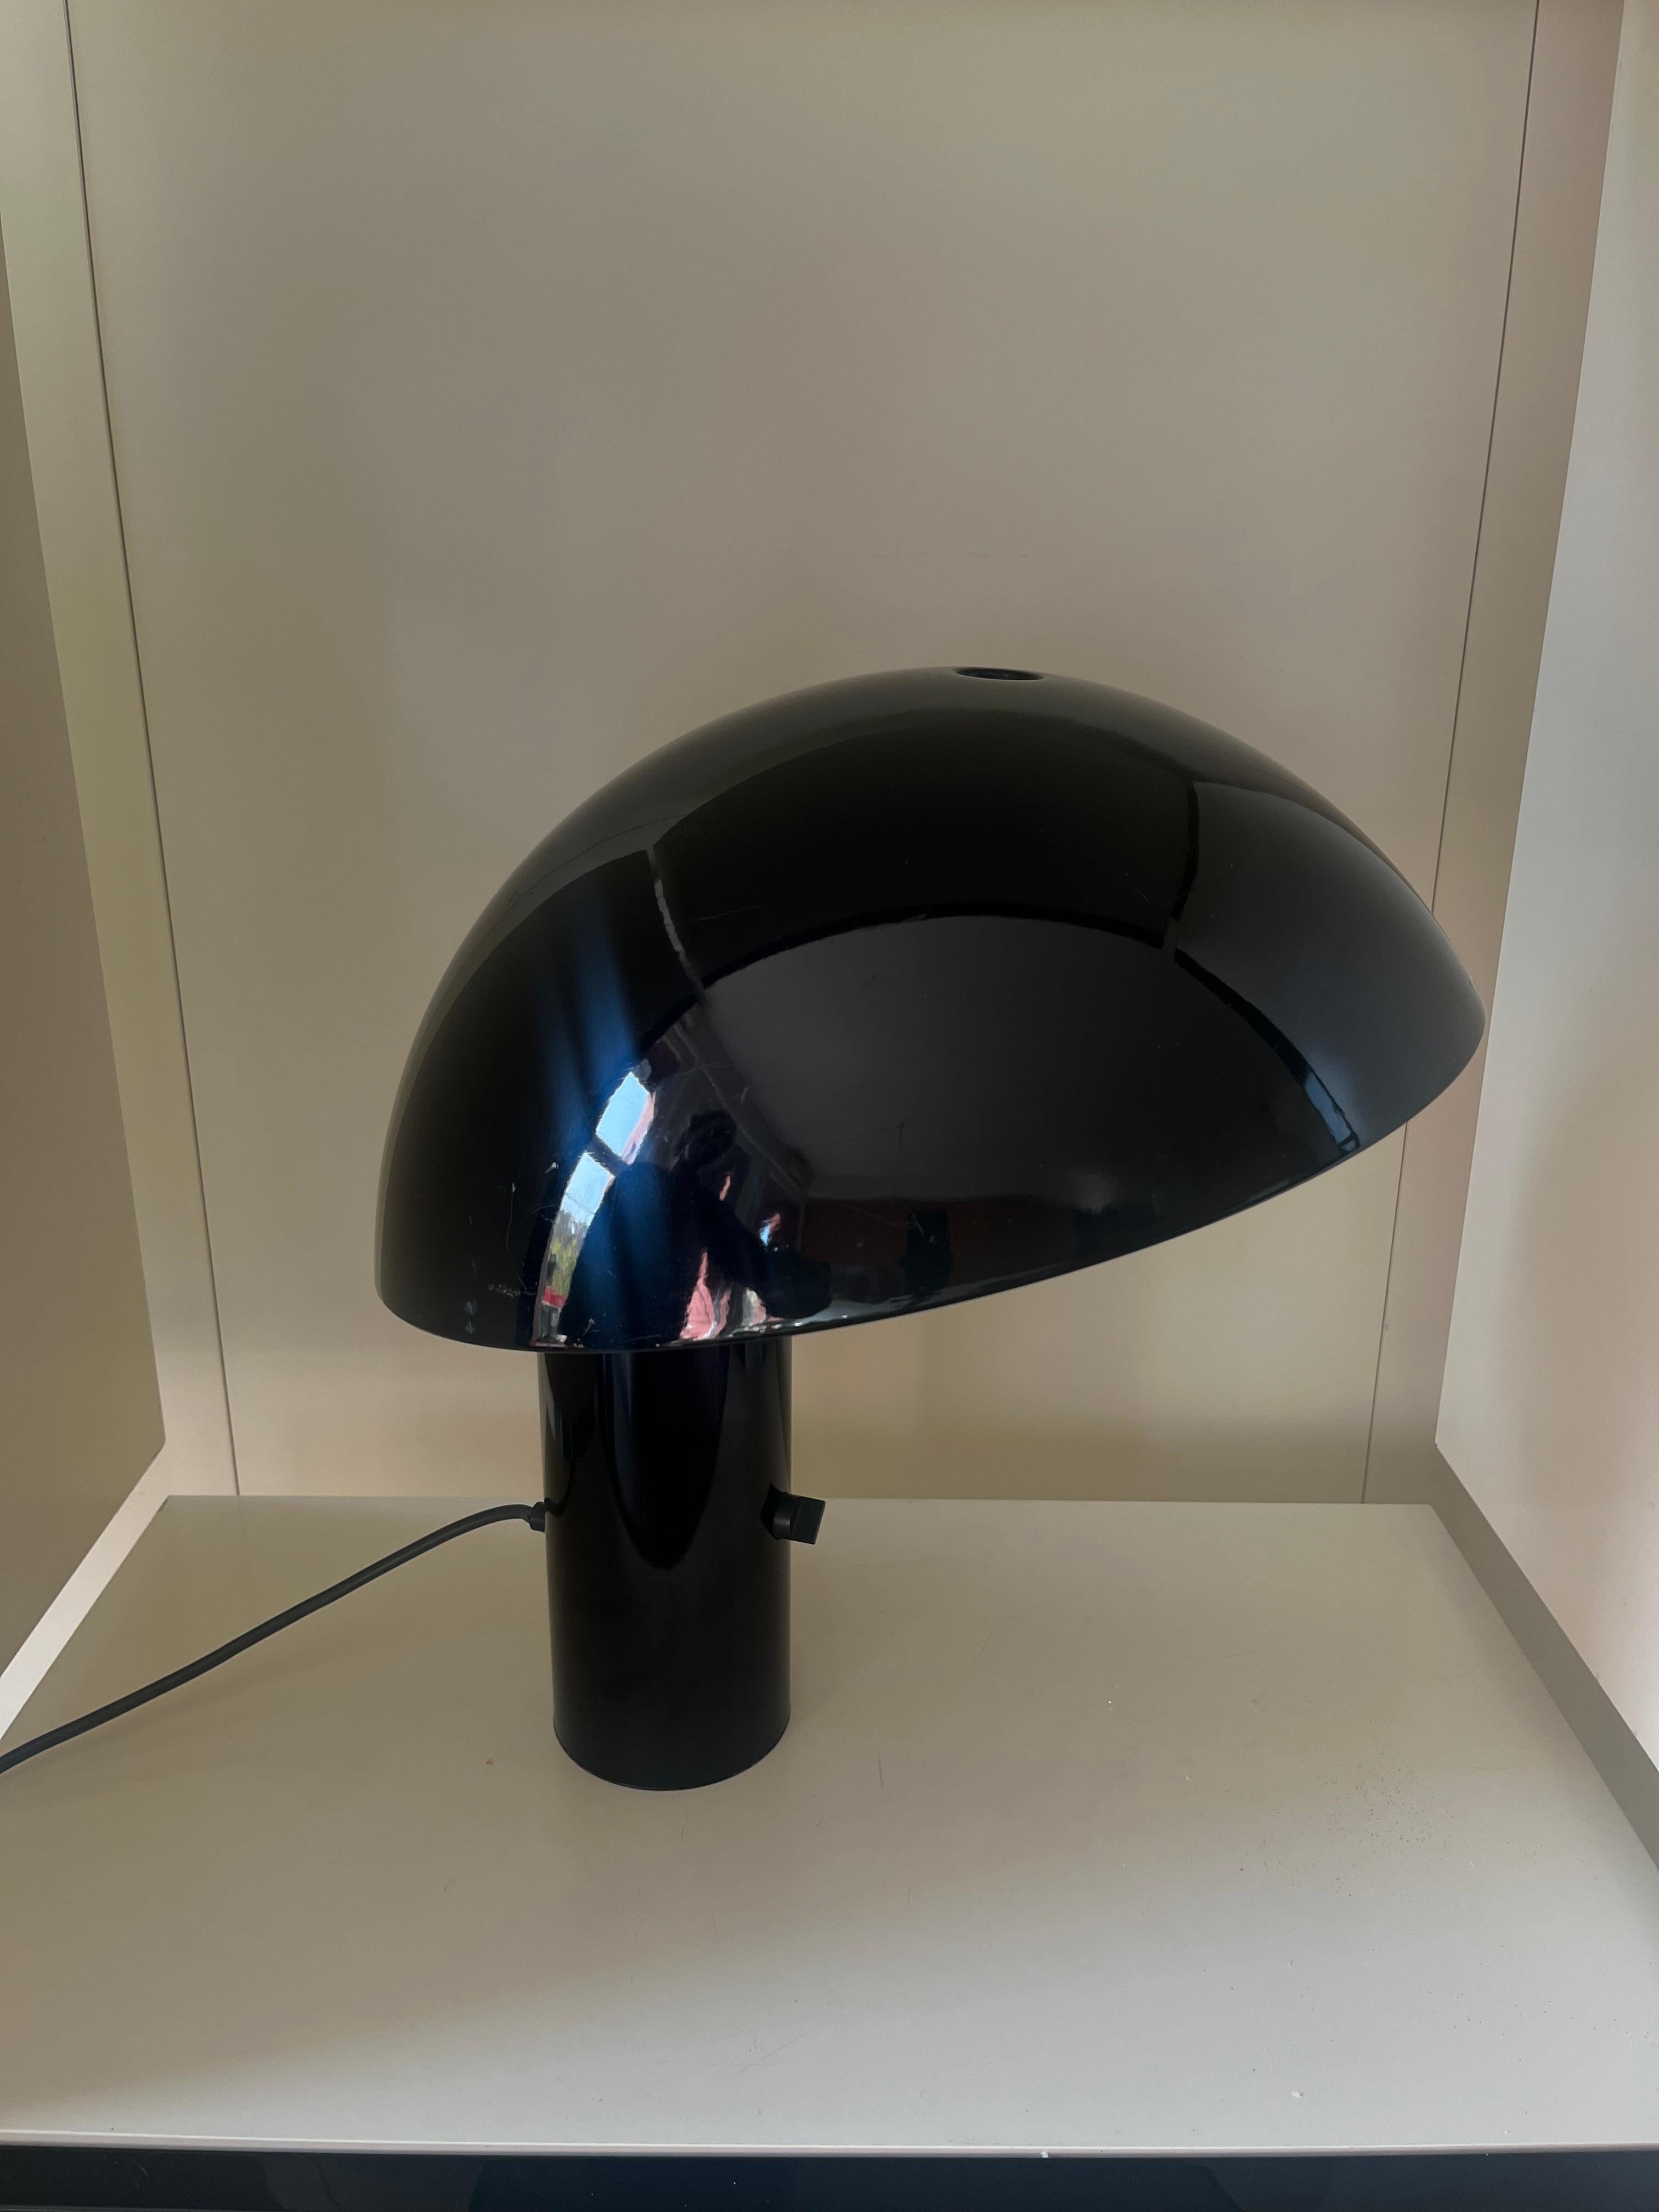 Vaga model table lamp designed by Franco Mirenzi for Valenti circa 1980. 

It is made of black metal and has a dimmable electrical system. 

Good condition, a few scratches and light coloring defects on the shell. 

